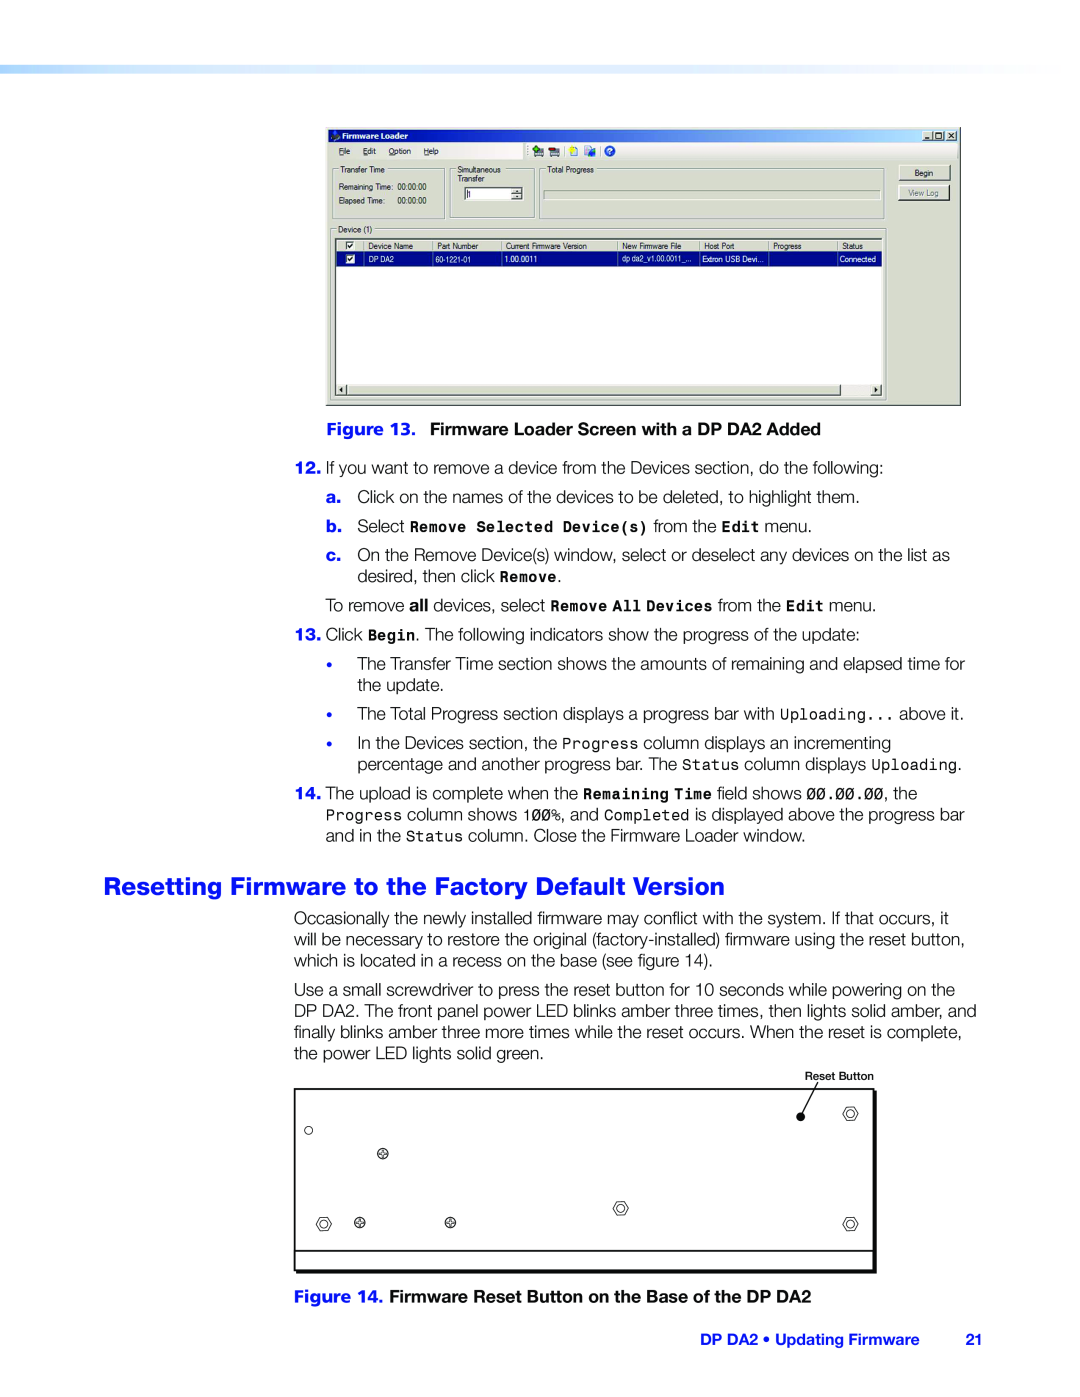 Extron electronic manual Resetting Firmware to the Factory Default Version, DP DA2 Updating Firmware 